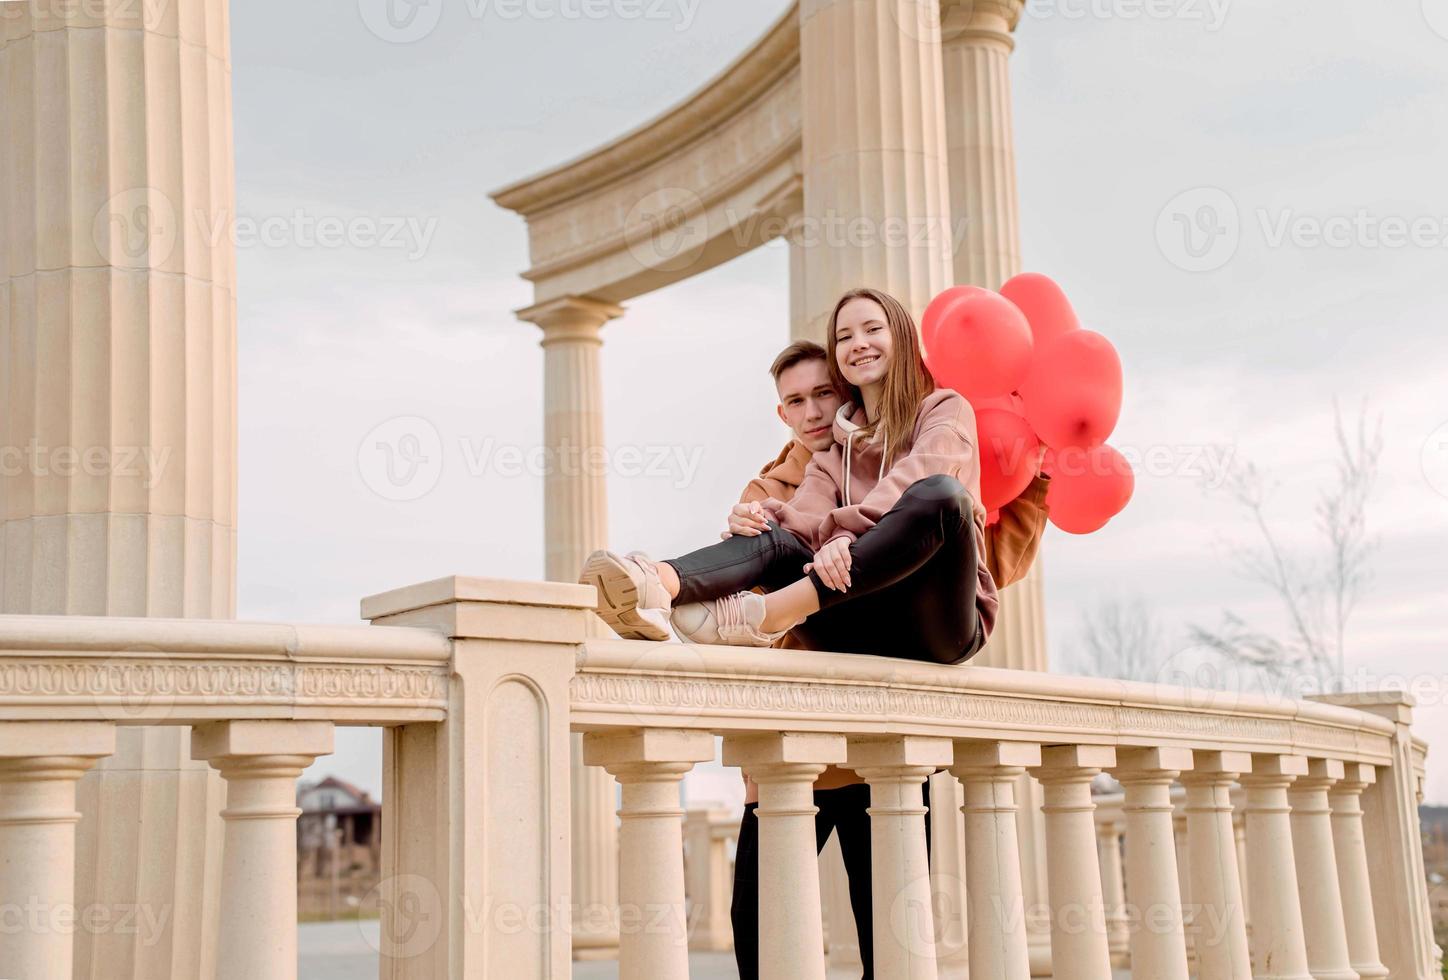 couple embracing each other outdoors in the park holding balloons photo